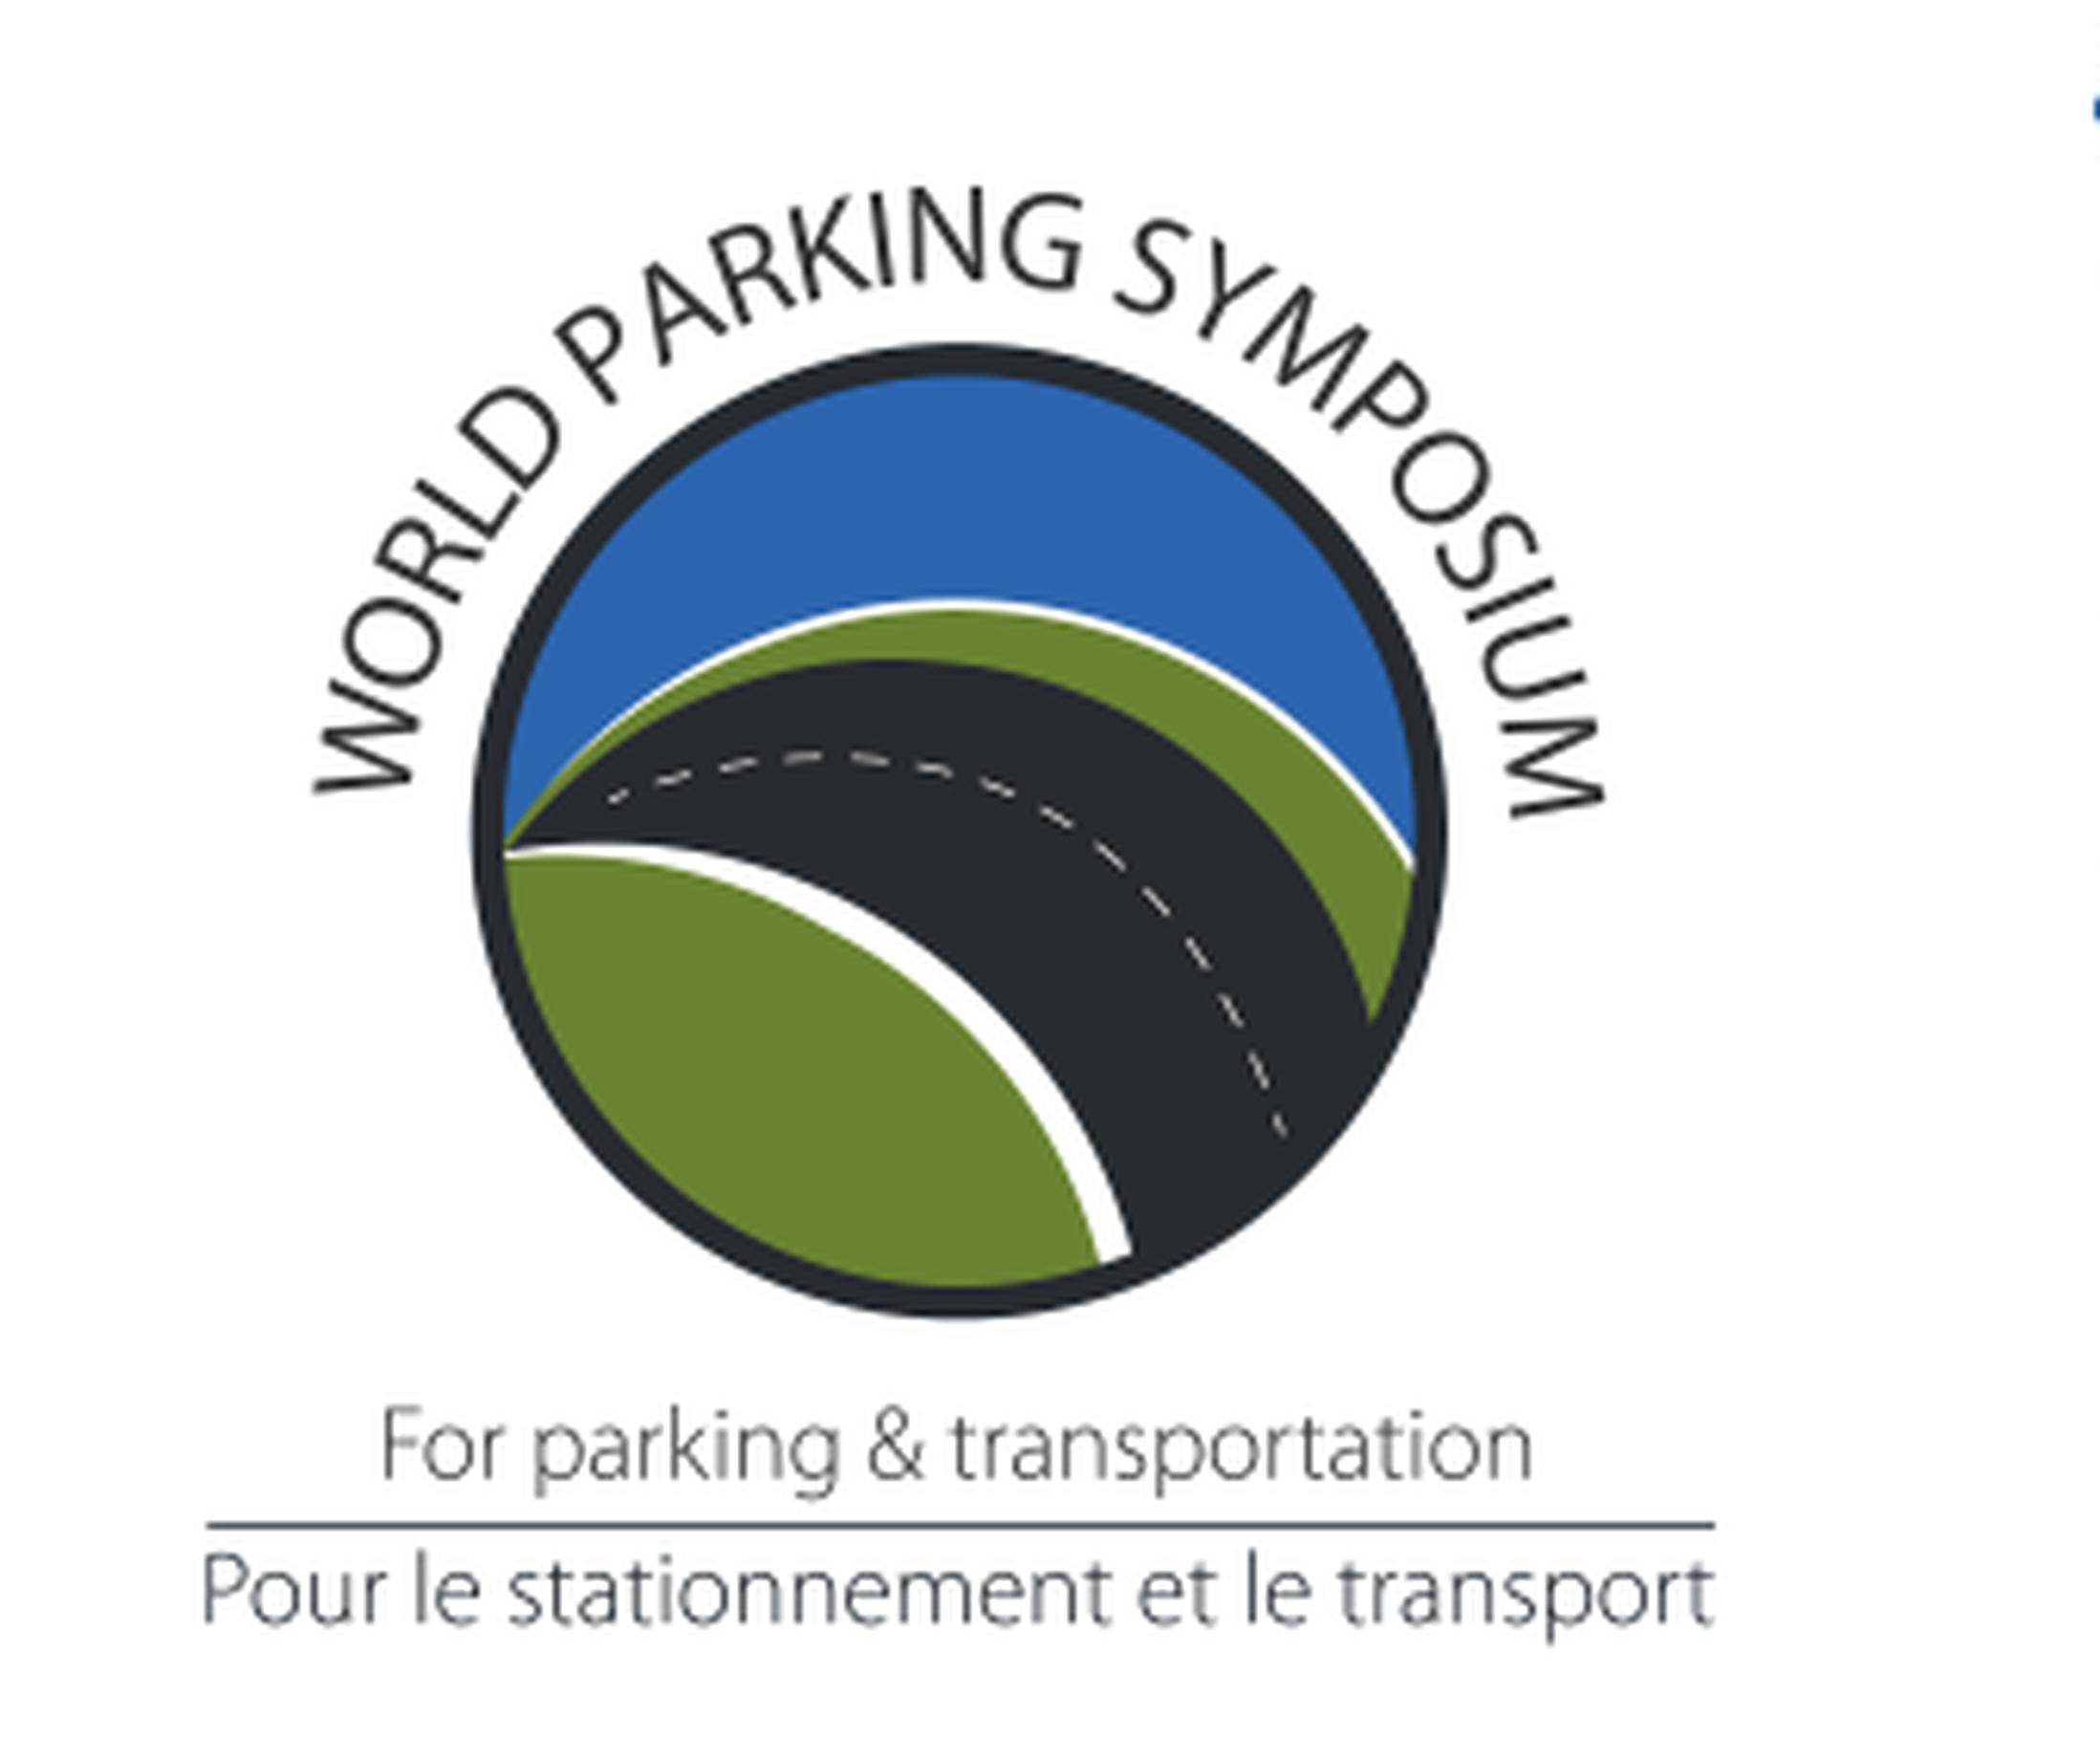 The World Parking Symposium is run by the Canadian Parking Foundation